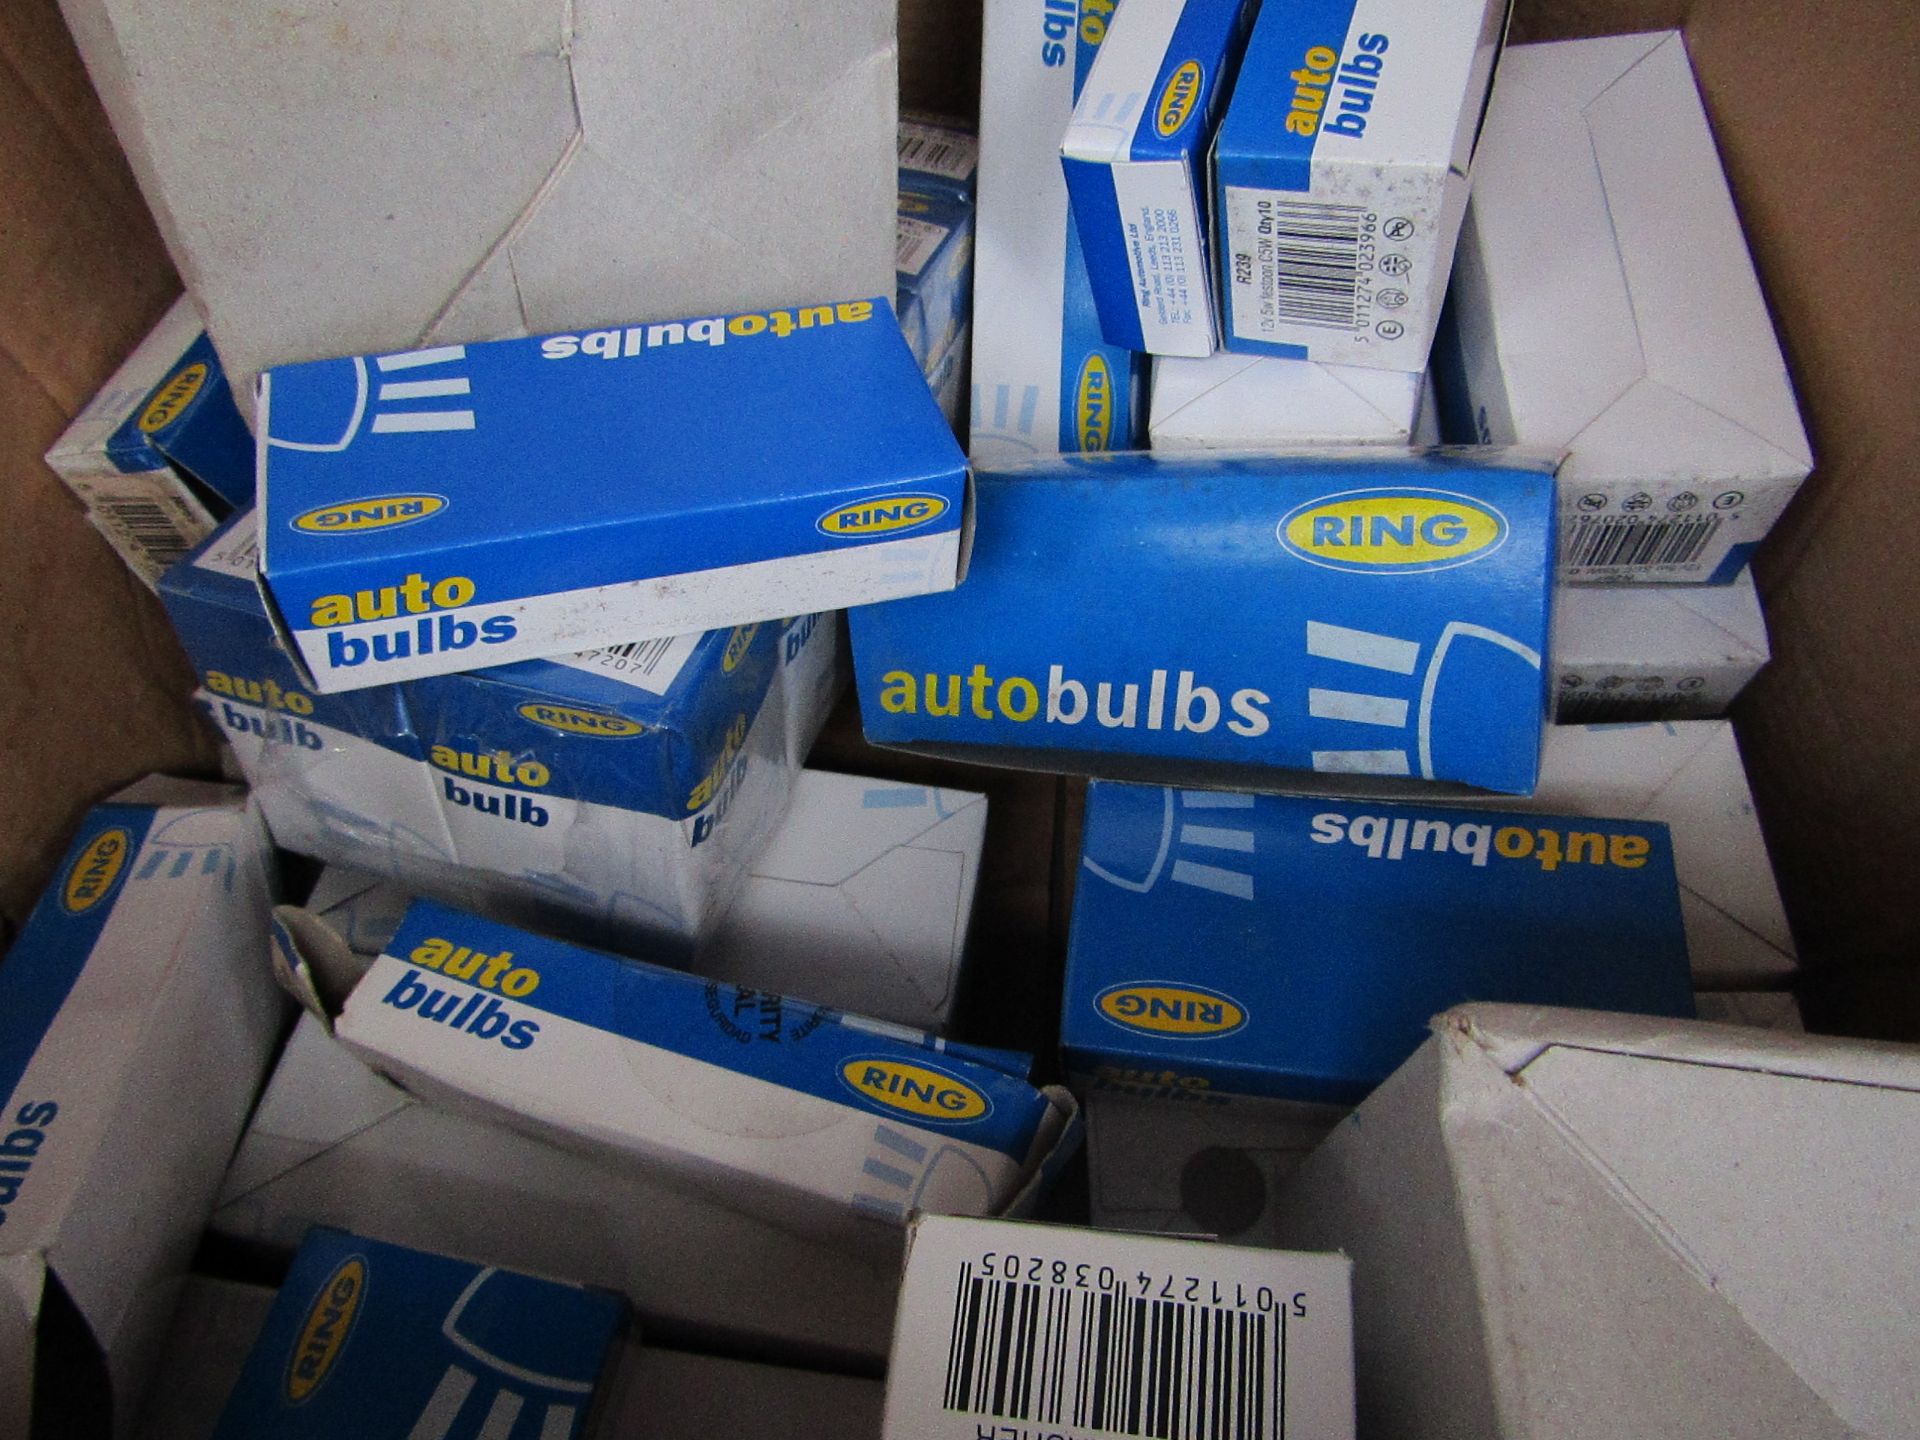 6x Boxes Of Auto Bulbs - All Picked At Random.